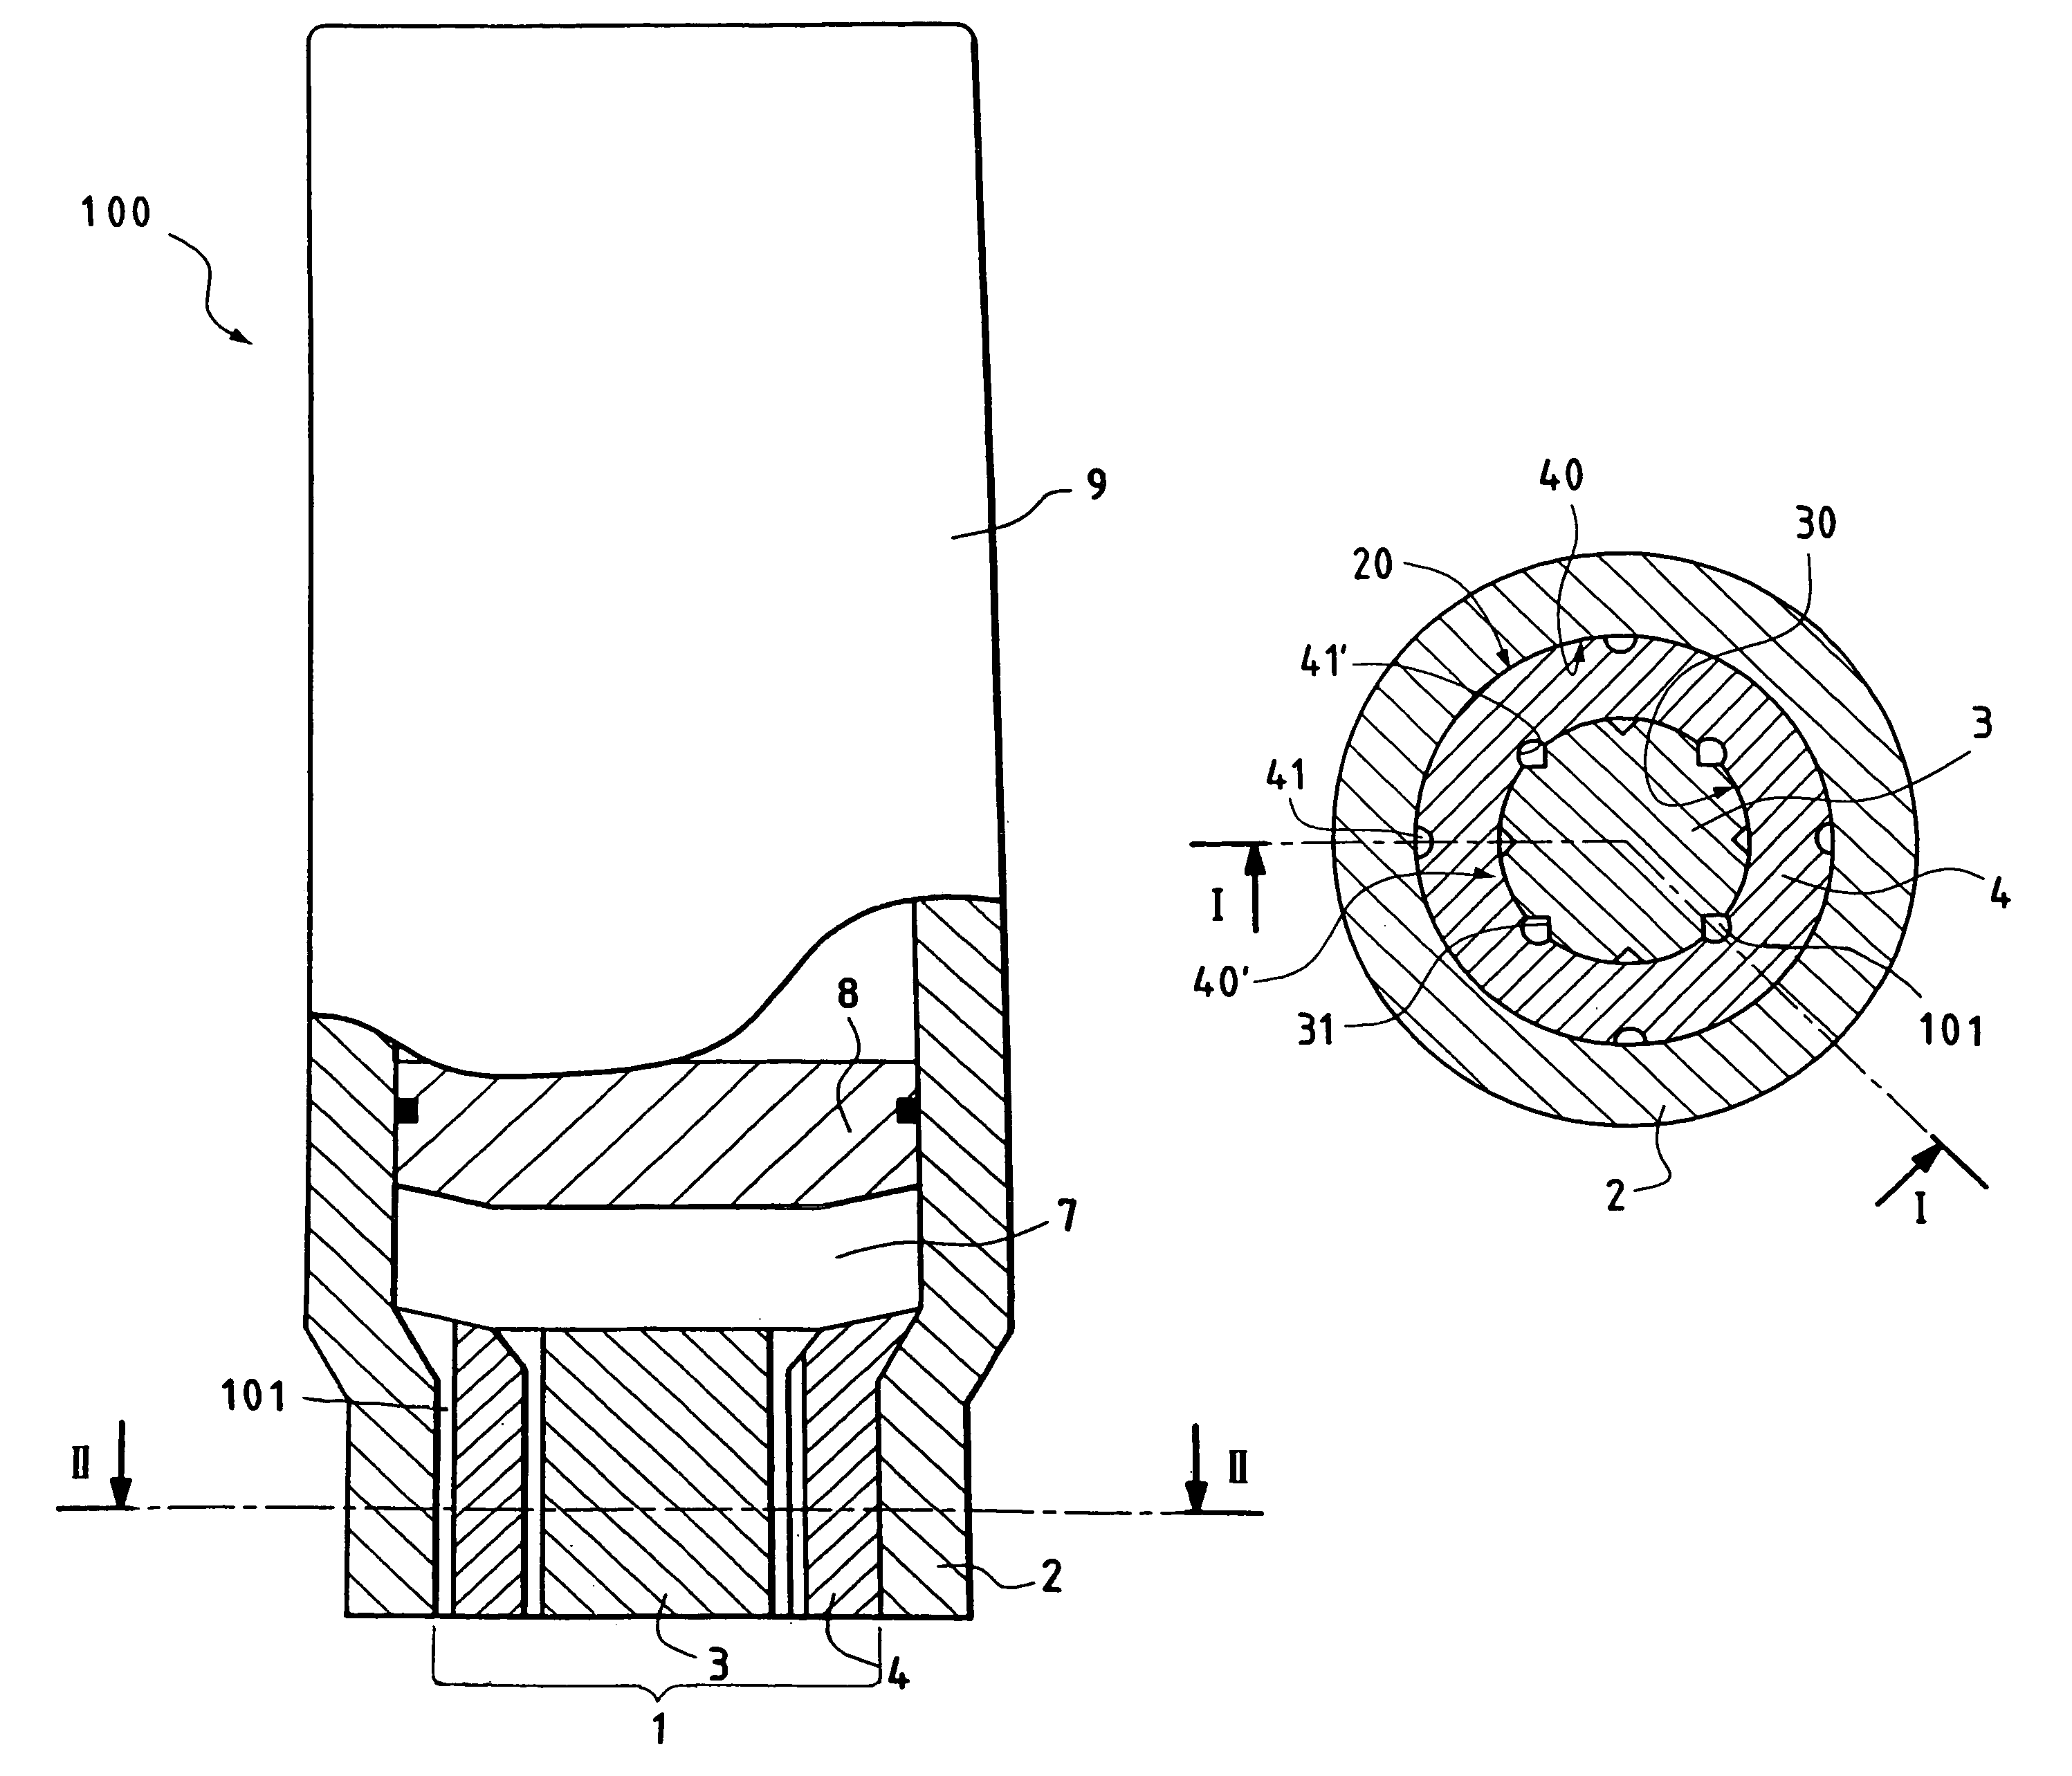 Needleless syringe comprising an injector with nested elements